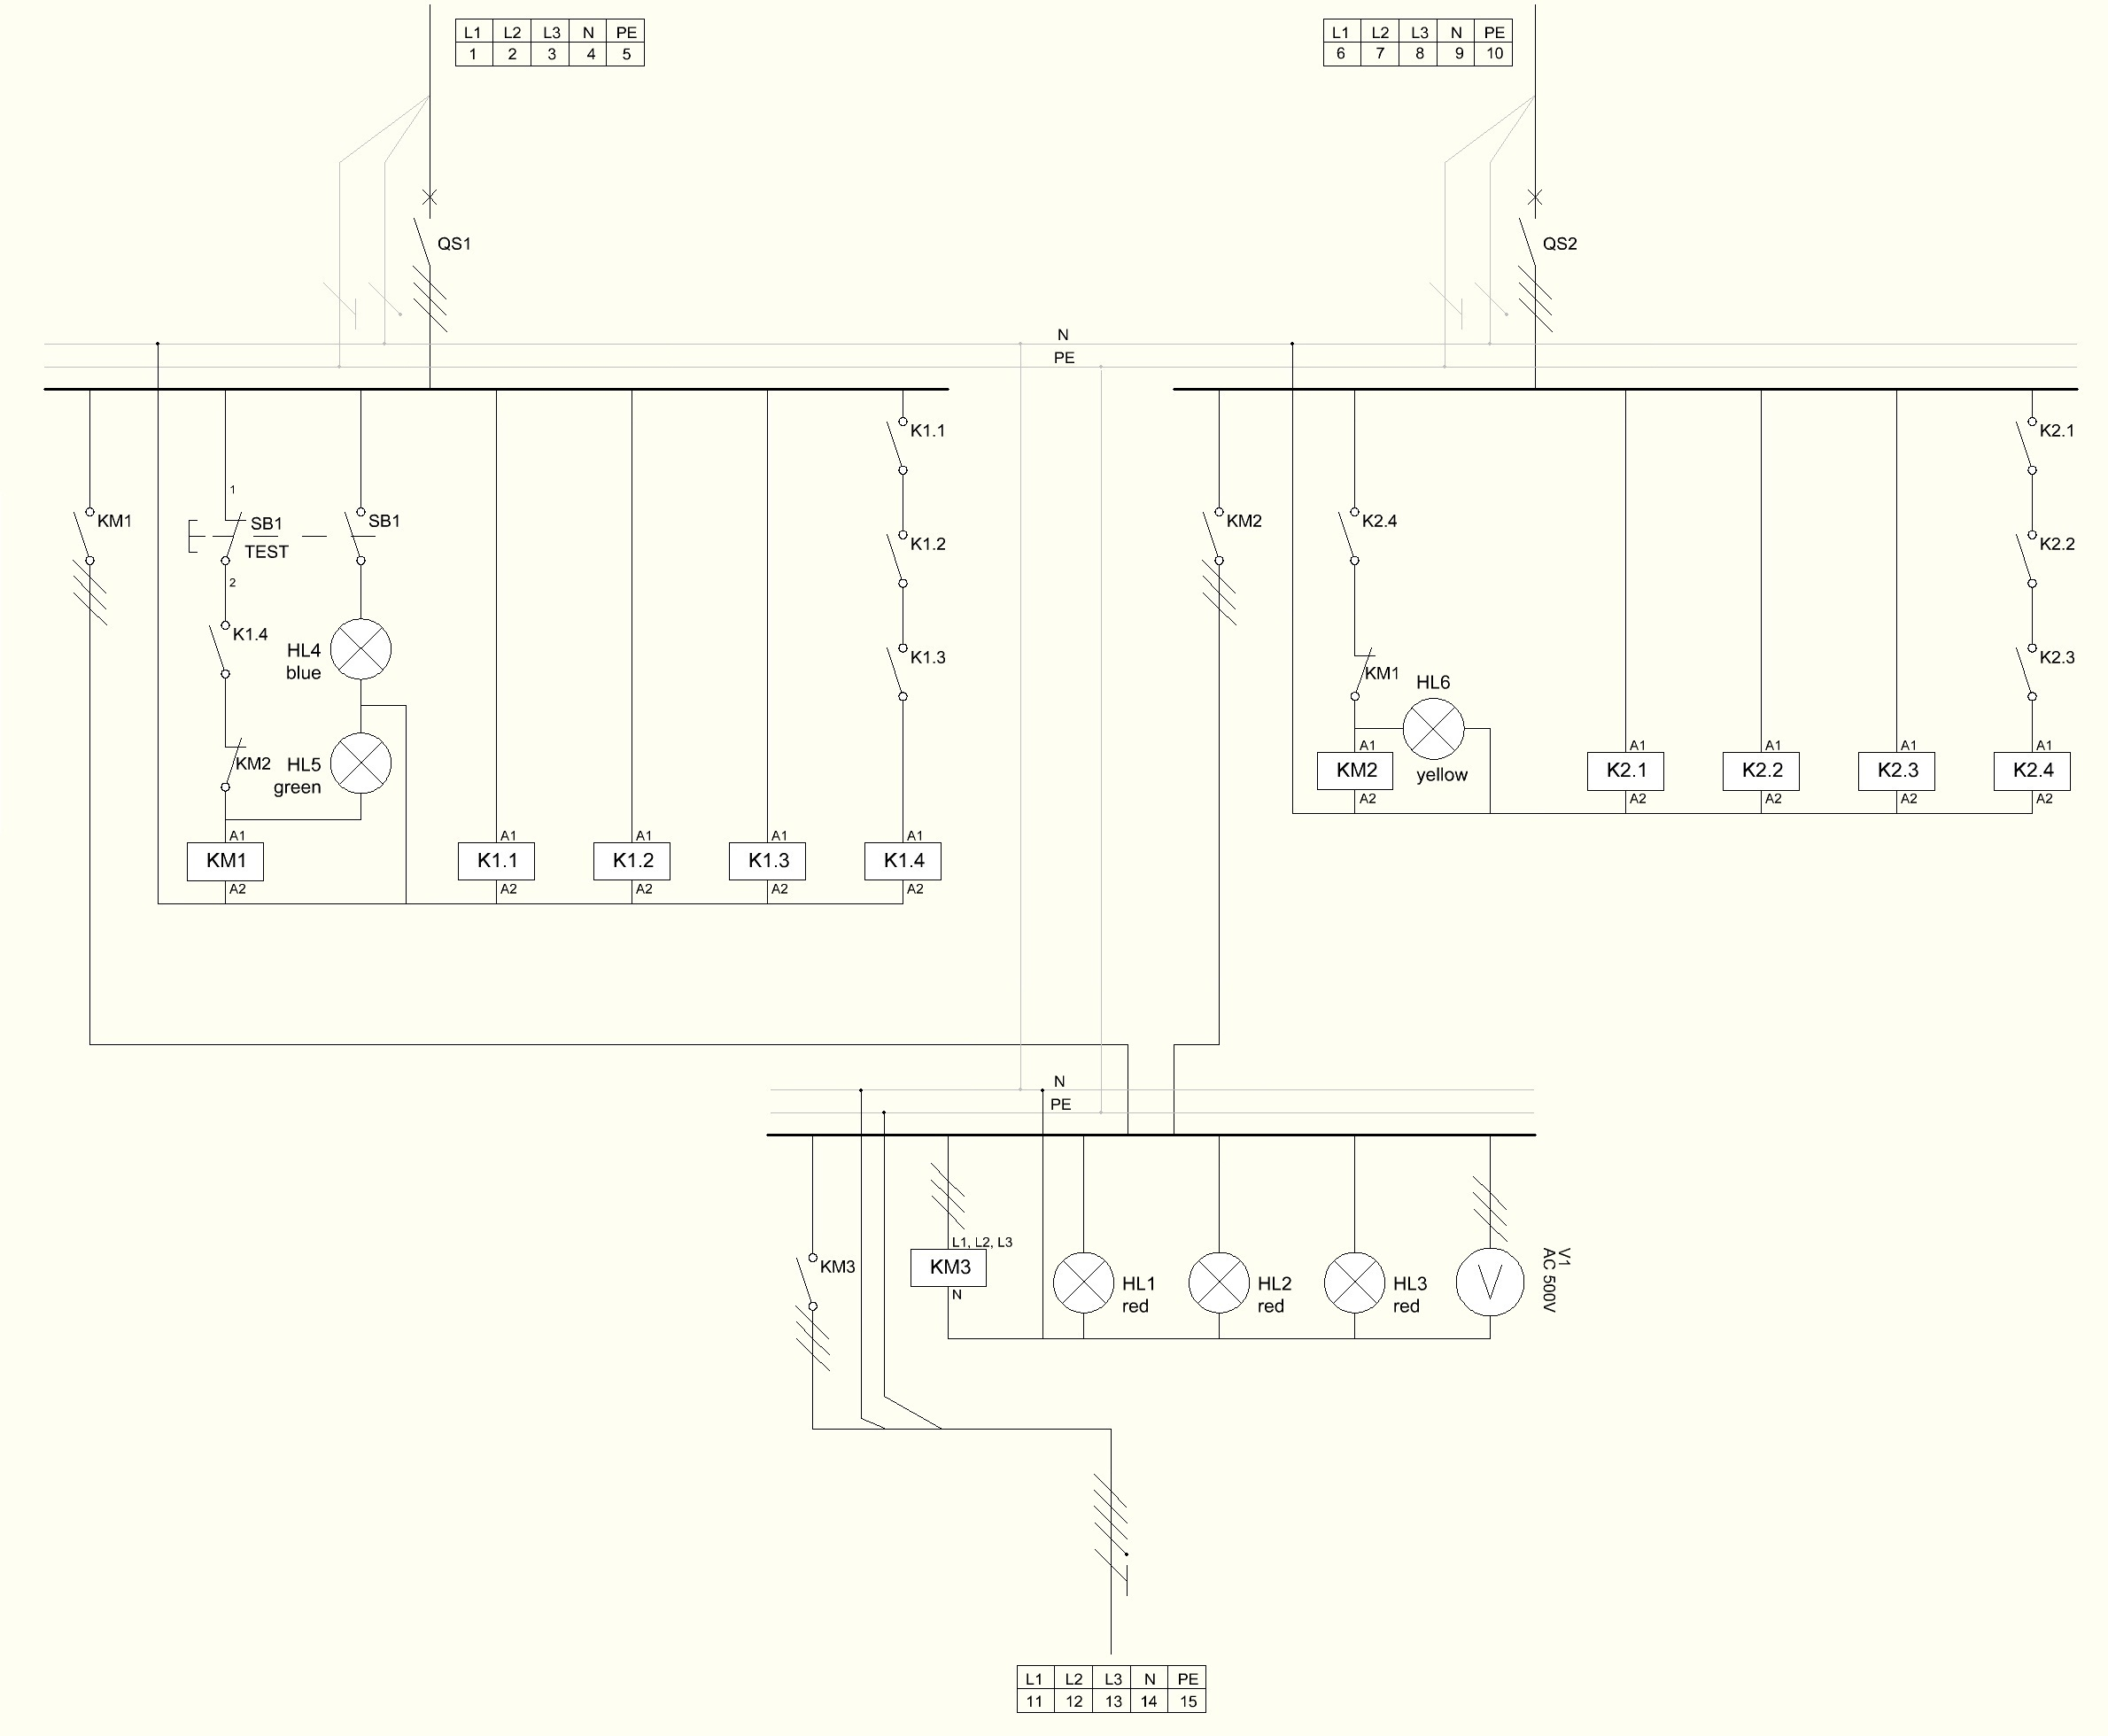 File:wiring Diagram Of 3-Phase Transfer Switch - Wikimedia Commons - Transfer Switch Wiring Diagram